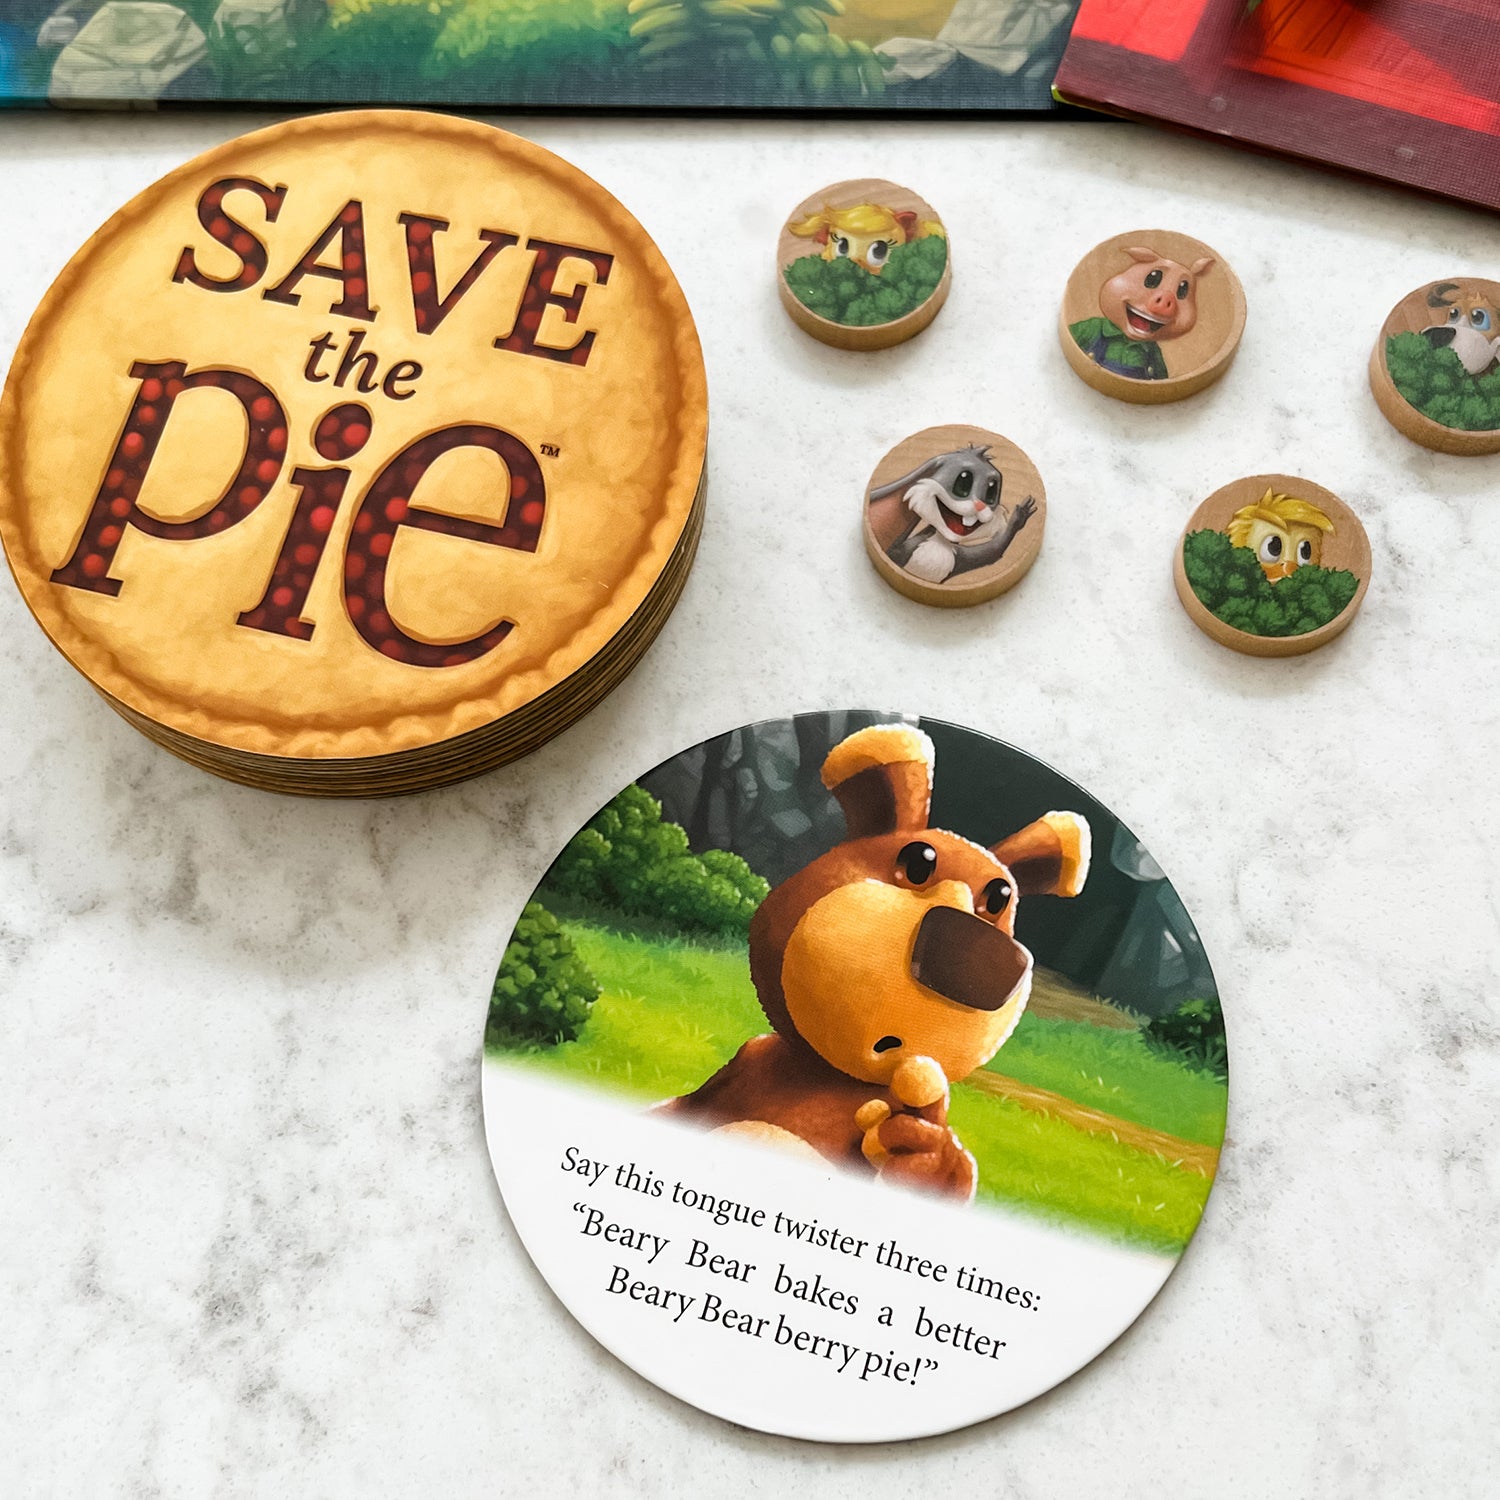 Save the Pie by SimplyFun is a collaborative game focusing on teamwork and fine motor skills for ages 6 and up.